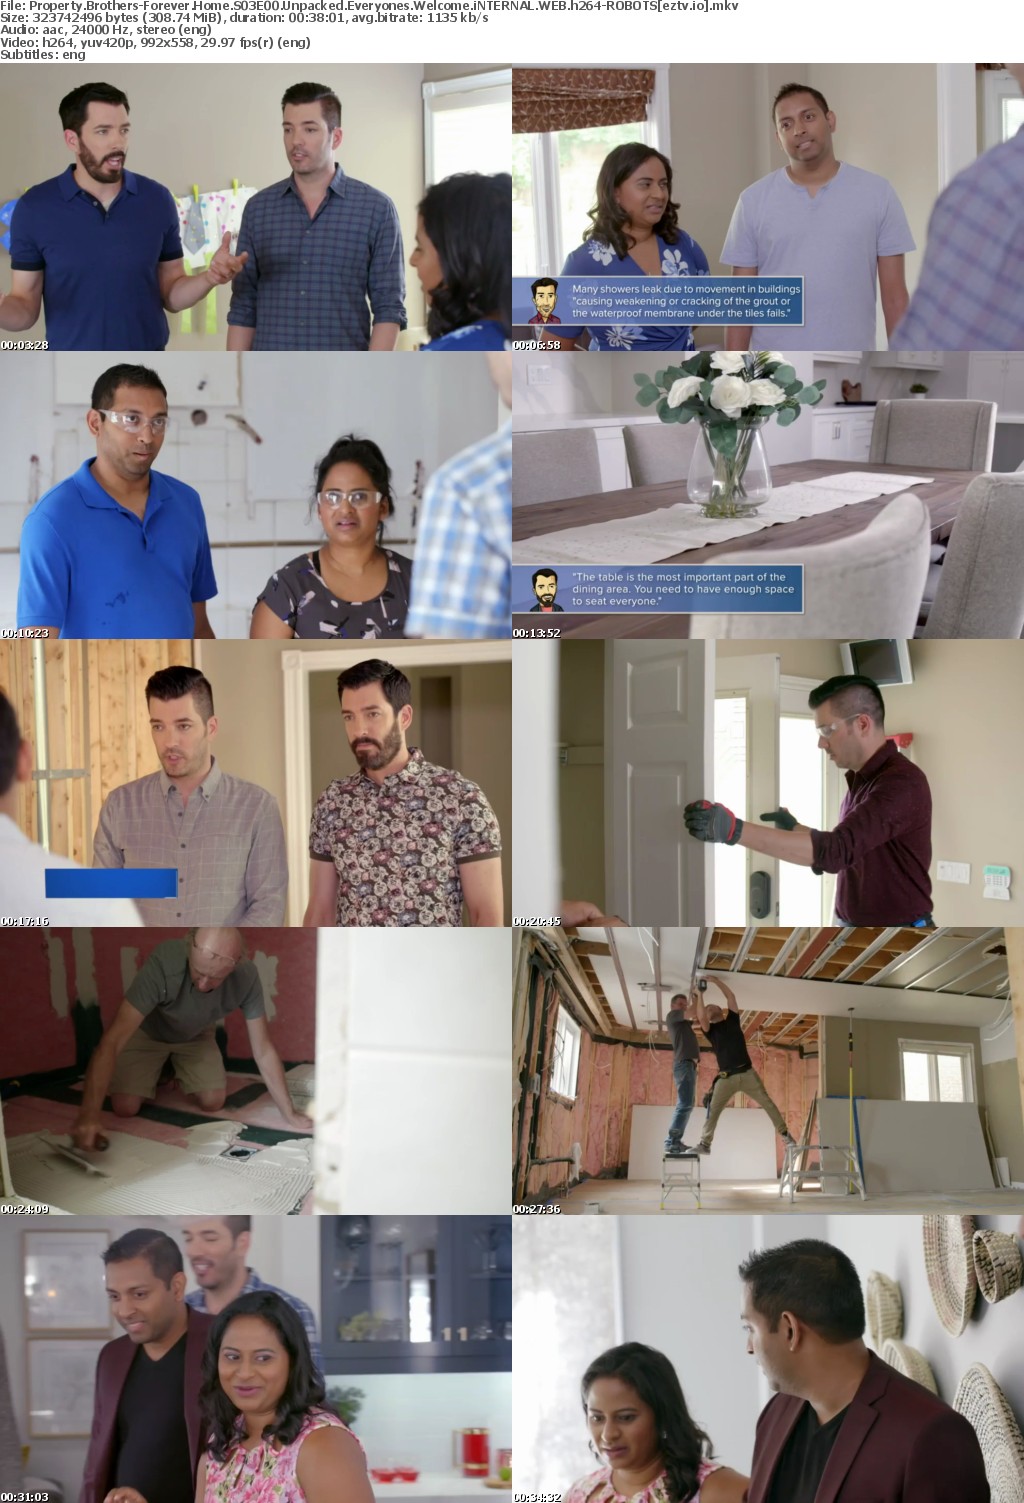 Property Brothers-Forever Home S03E00 Unpacked Everyones Welcome iNTERNAL WEB h264-ROBOTS